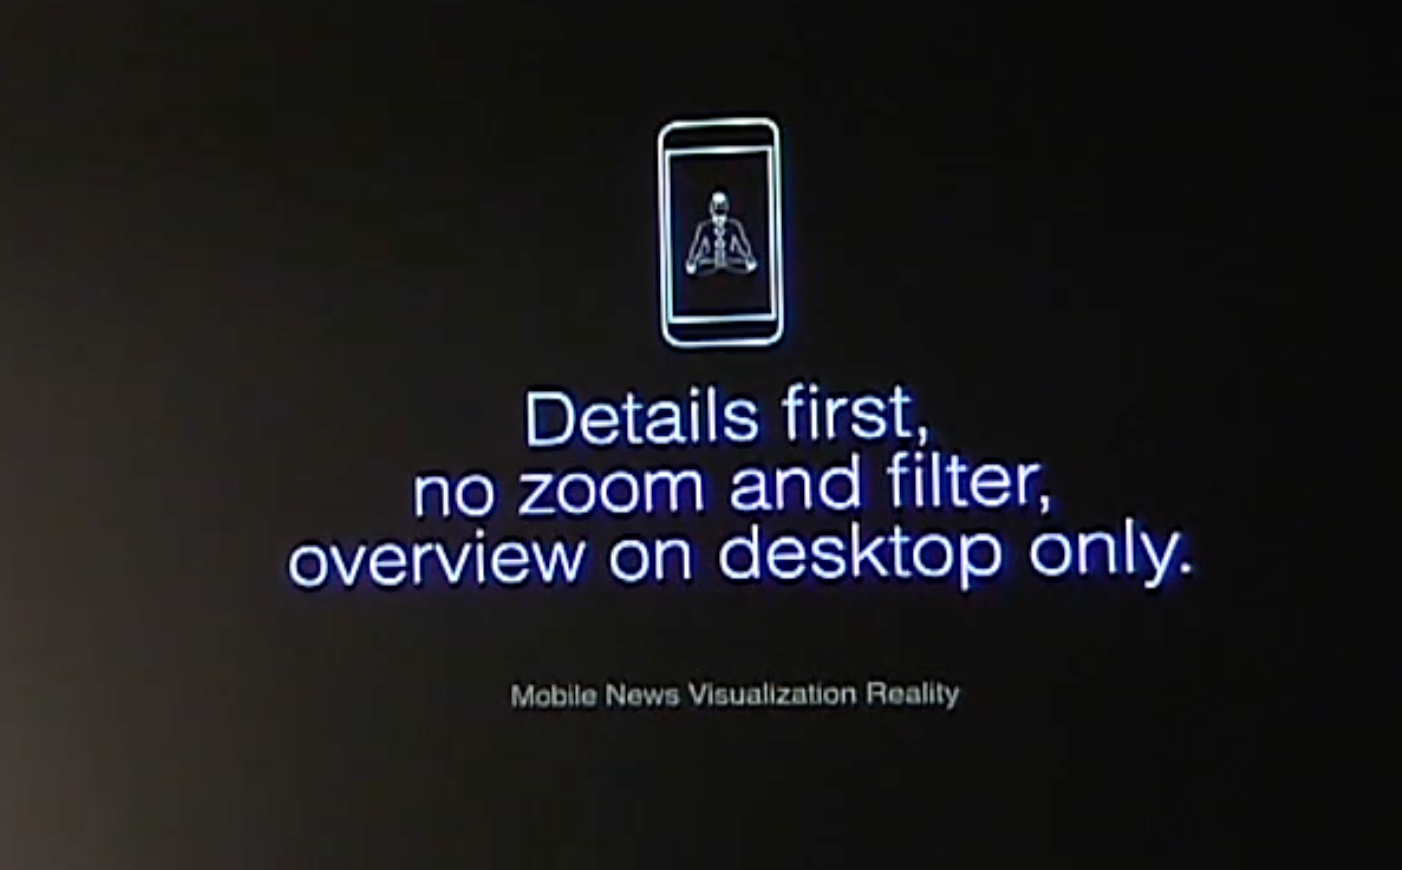 A slide from a slide deck with the text 'Details first, no zoom and filter, overview on desktop only. Mobile News Visualization Reality'